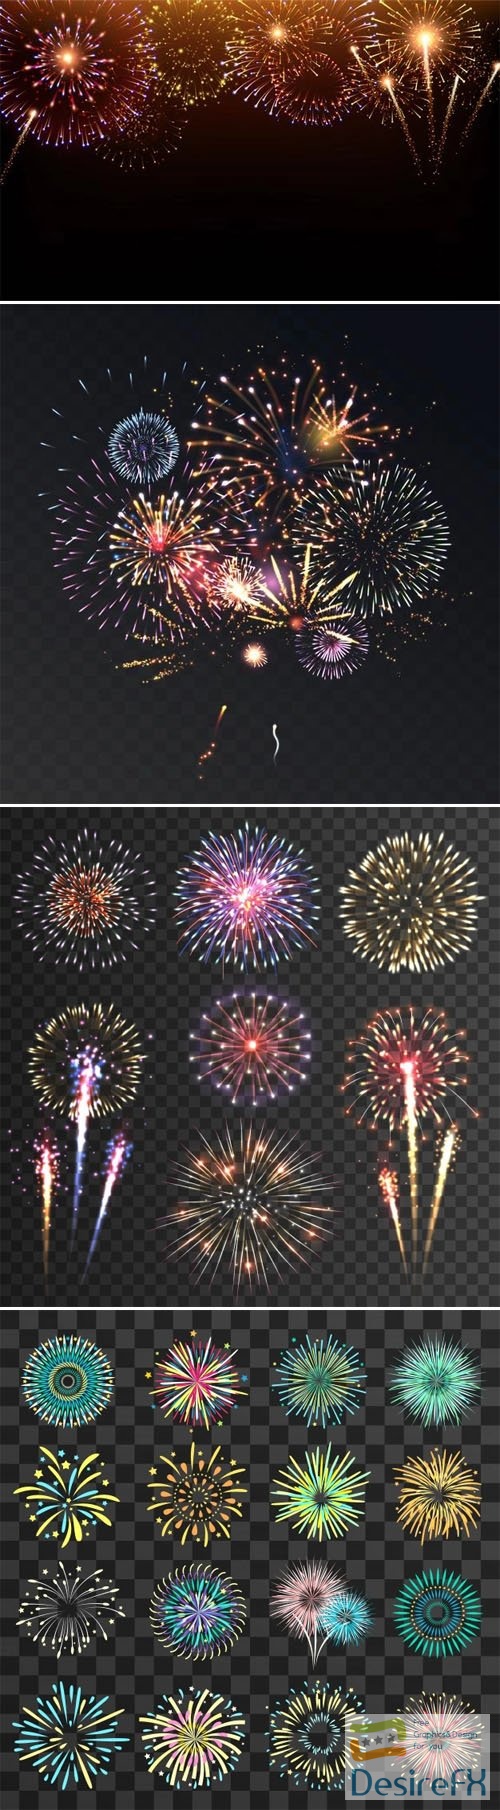 Realistic Festive Fireworks Collection - 9 Vector Templates